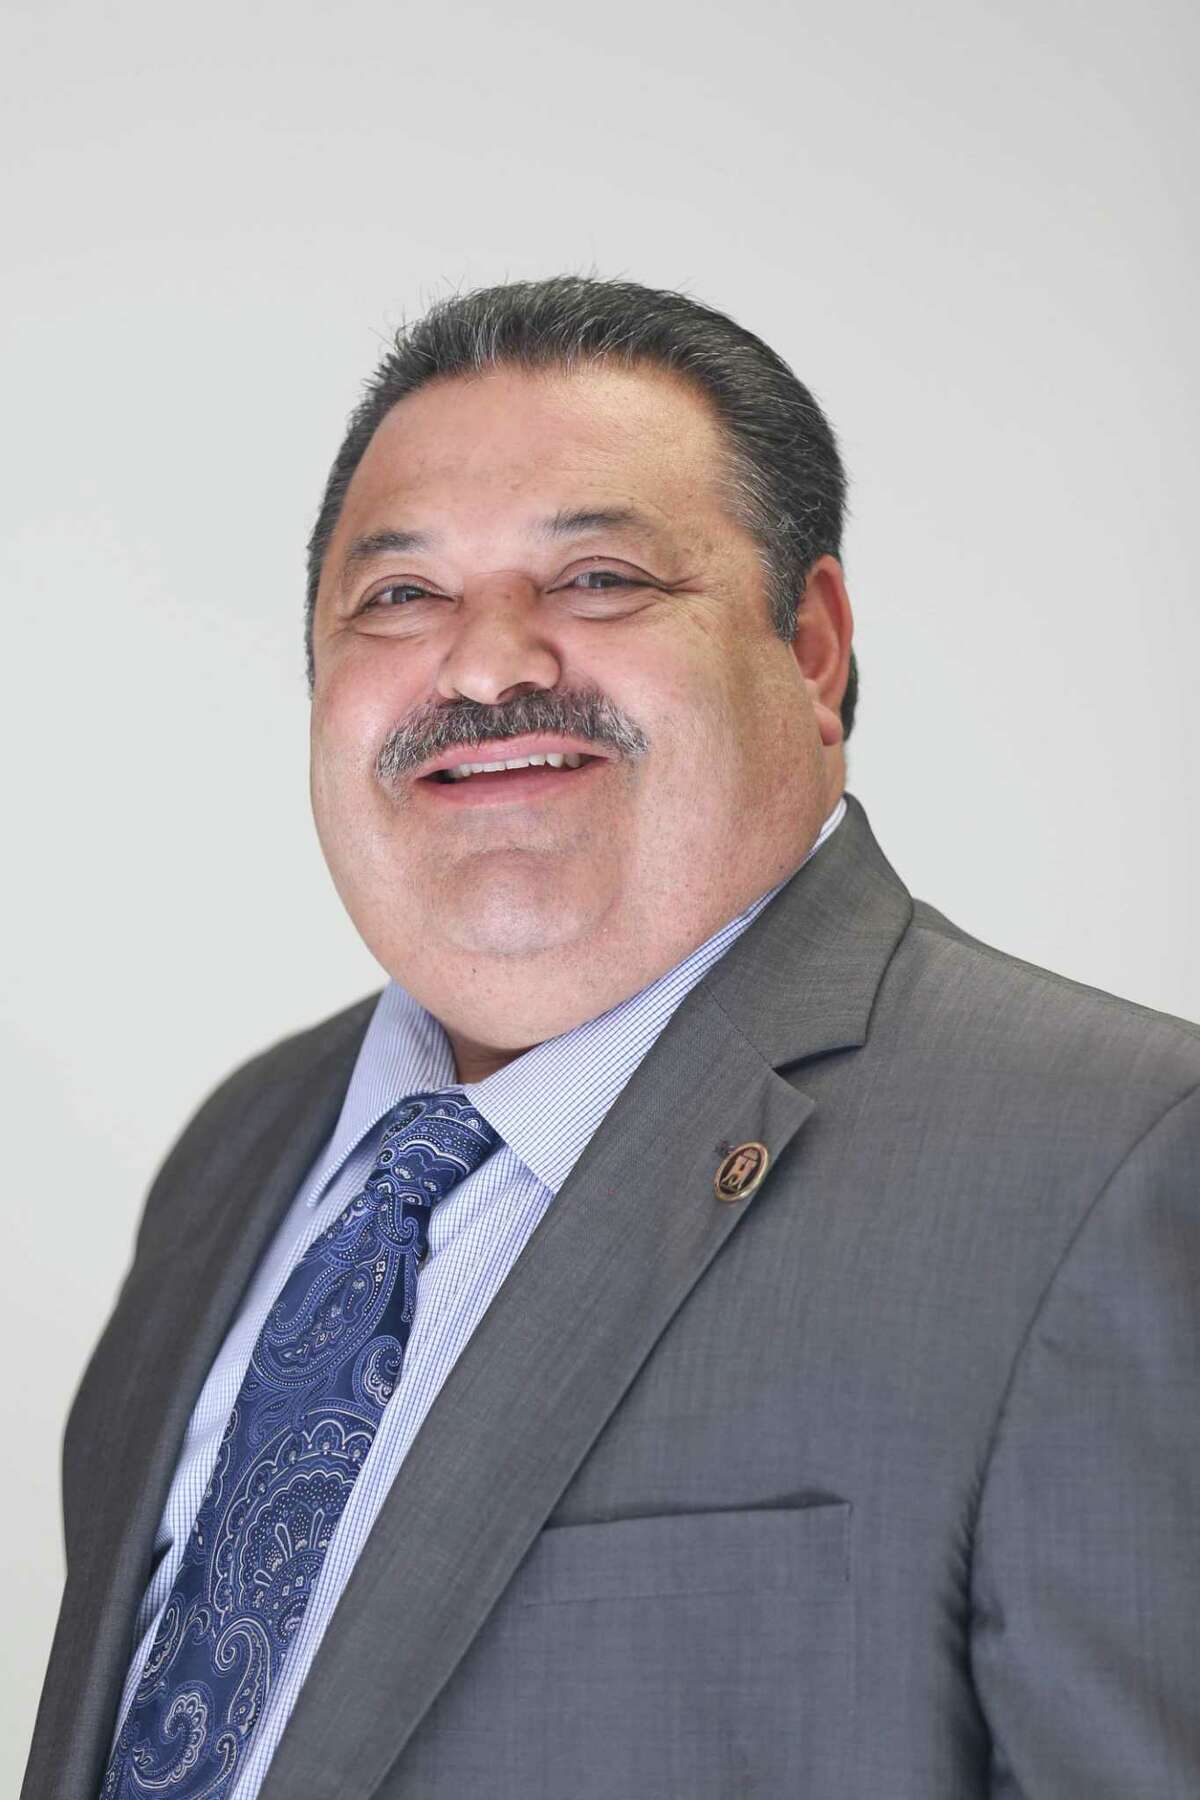 Rey Madrigal is the superintendent of Harlandale ISD.